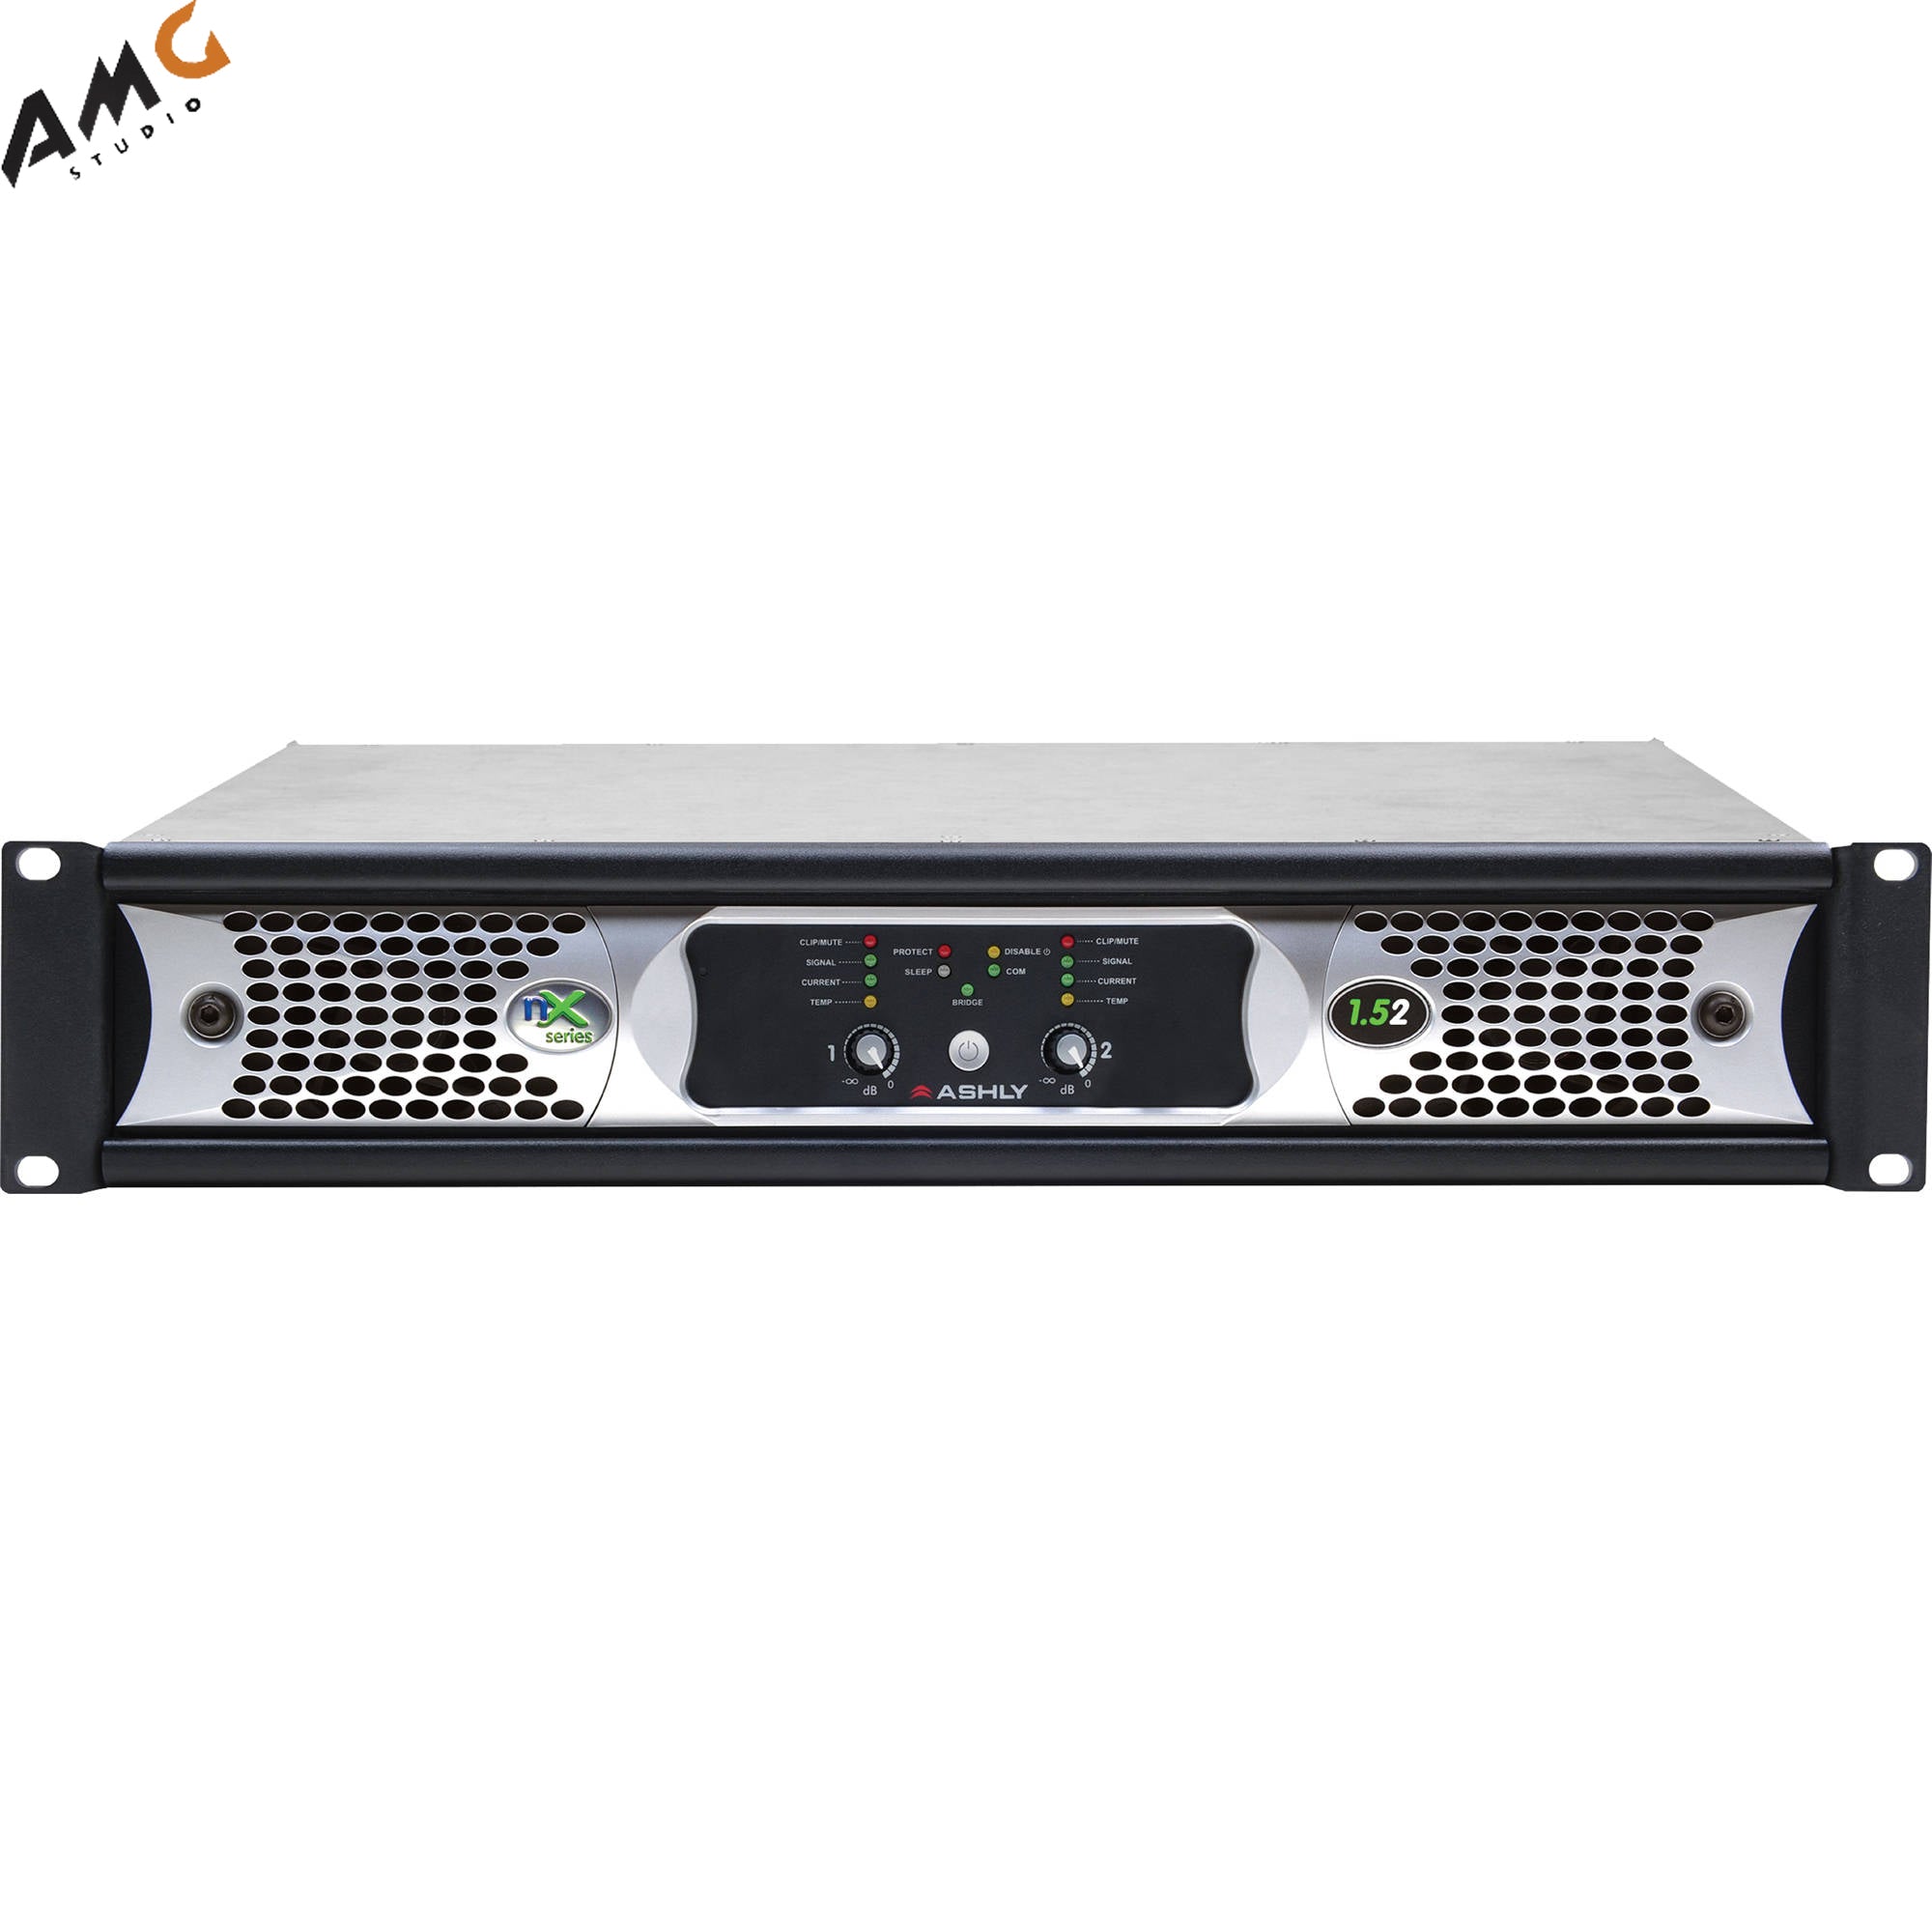 Ashly nX1.52 Power Amplifier 2 x 1500 Watts/2 Ohms with Programmable Outputs - Studio AMG